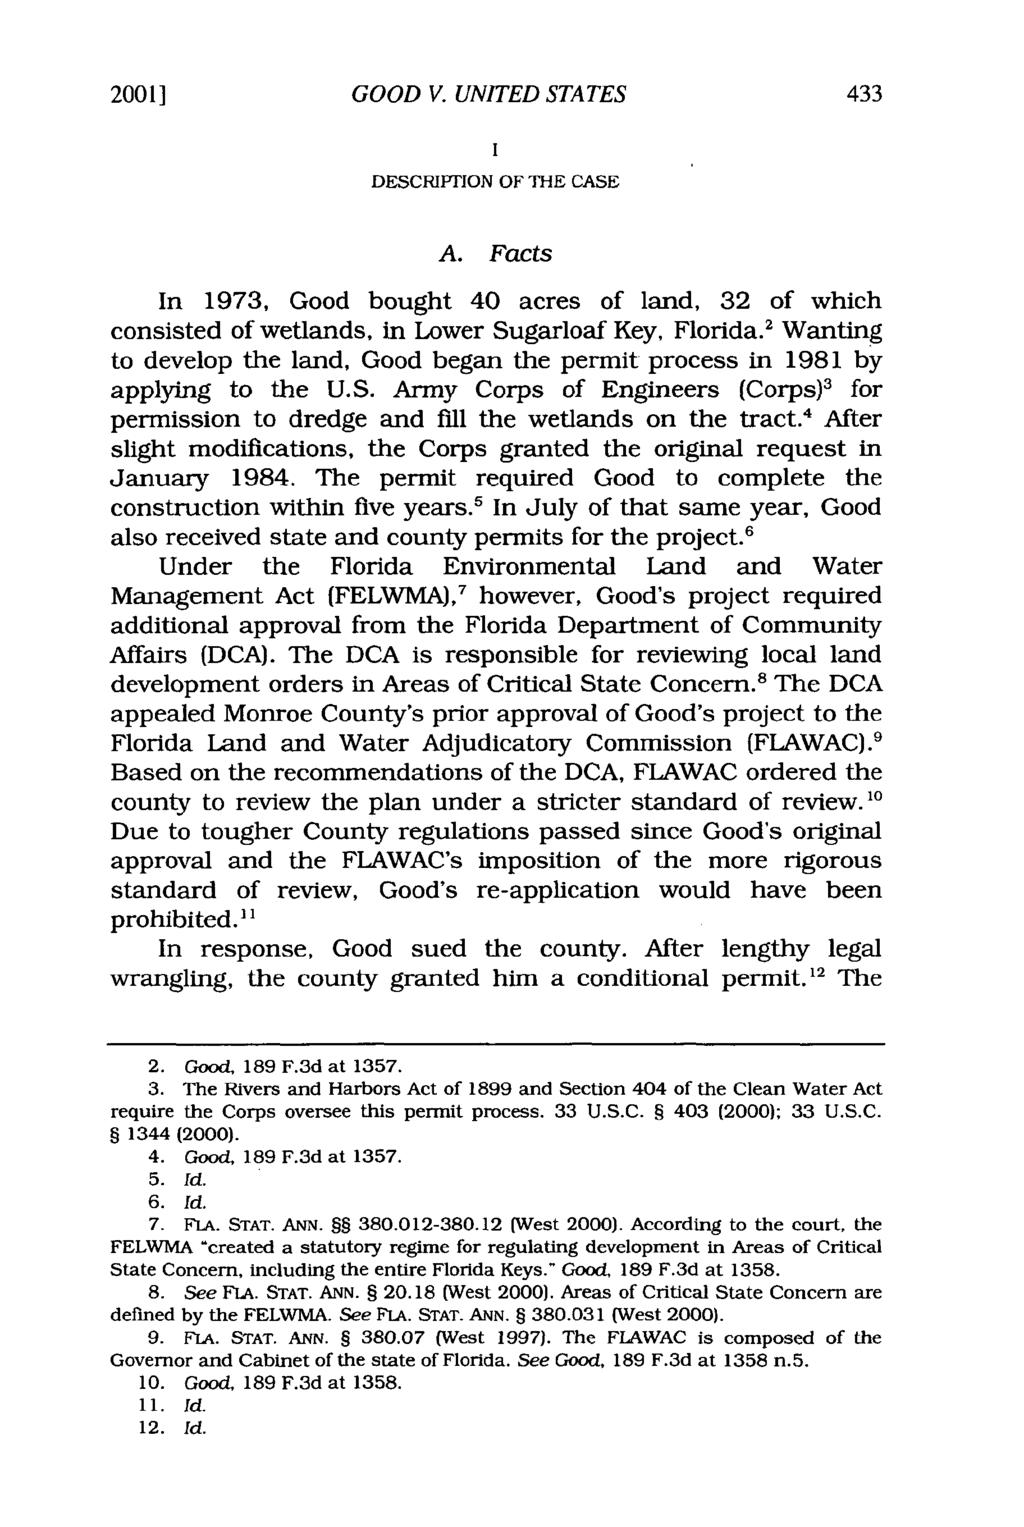 2001] GOOD V. UNITED STATES DESCRIPTION OF THE CASE A. Facts In 1973, Good bought 40 acres of land, 32 of which consisted of wetlands, in Lower Sugarloaf Key, Florida.